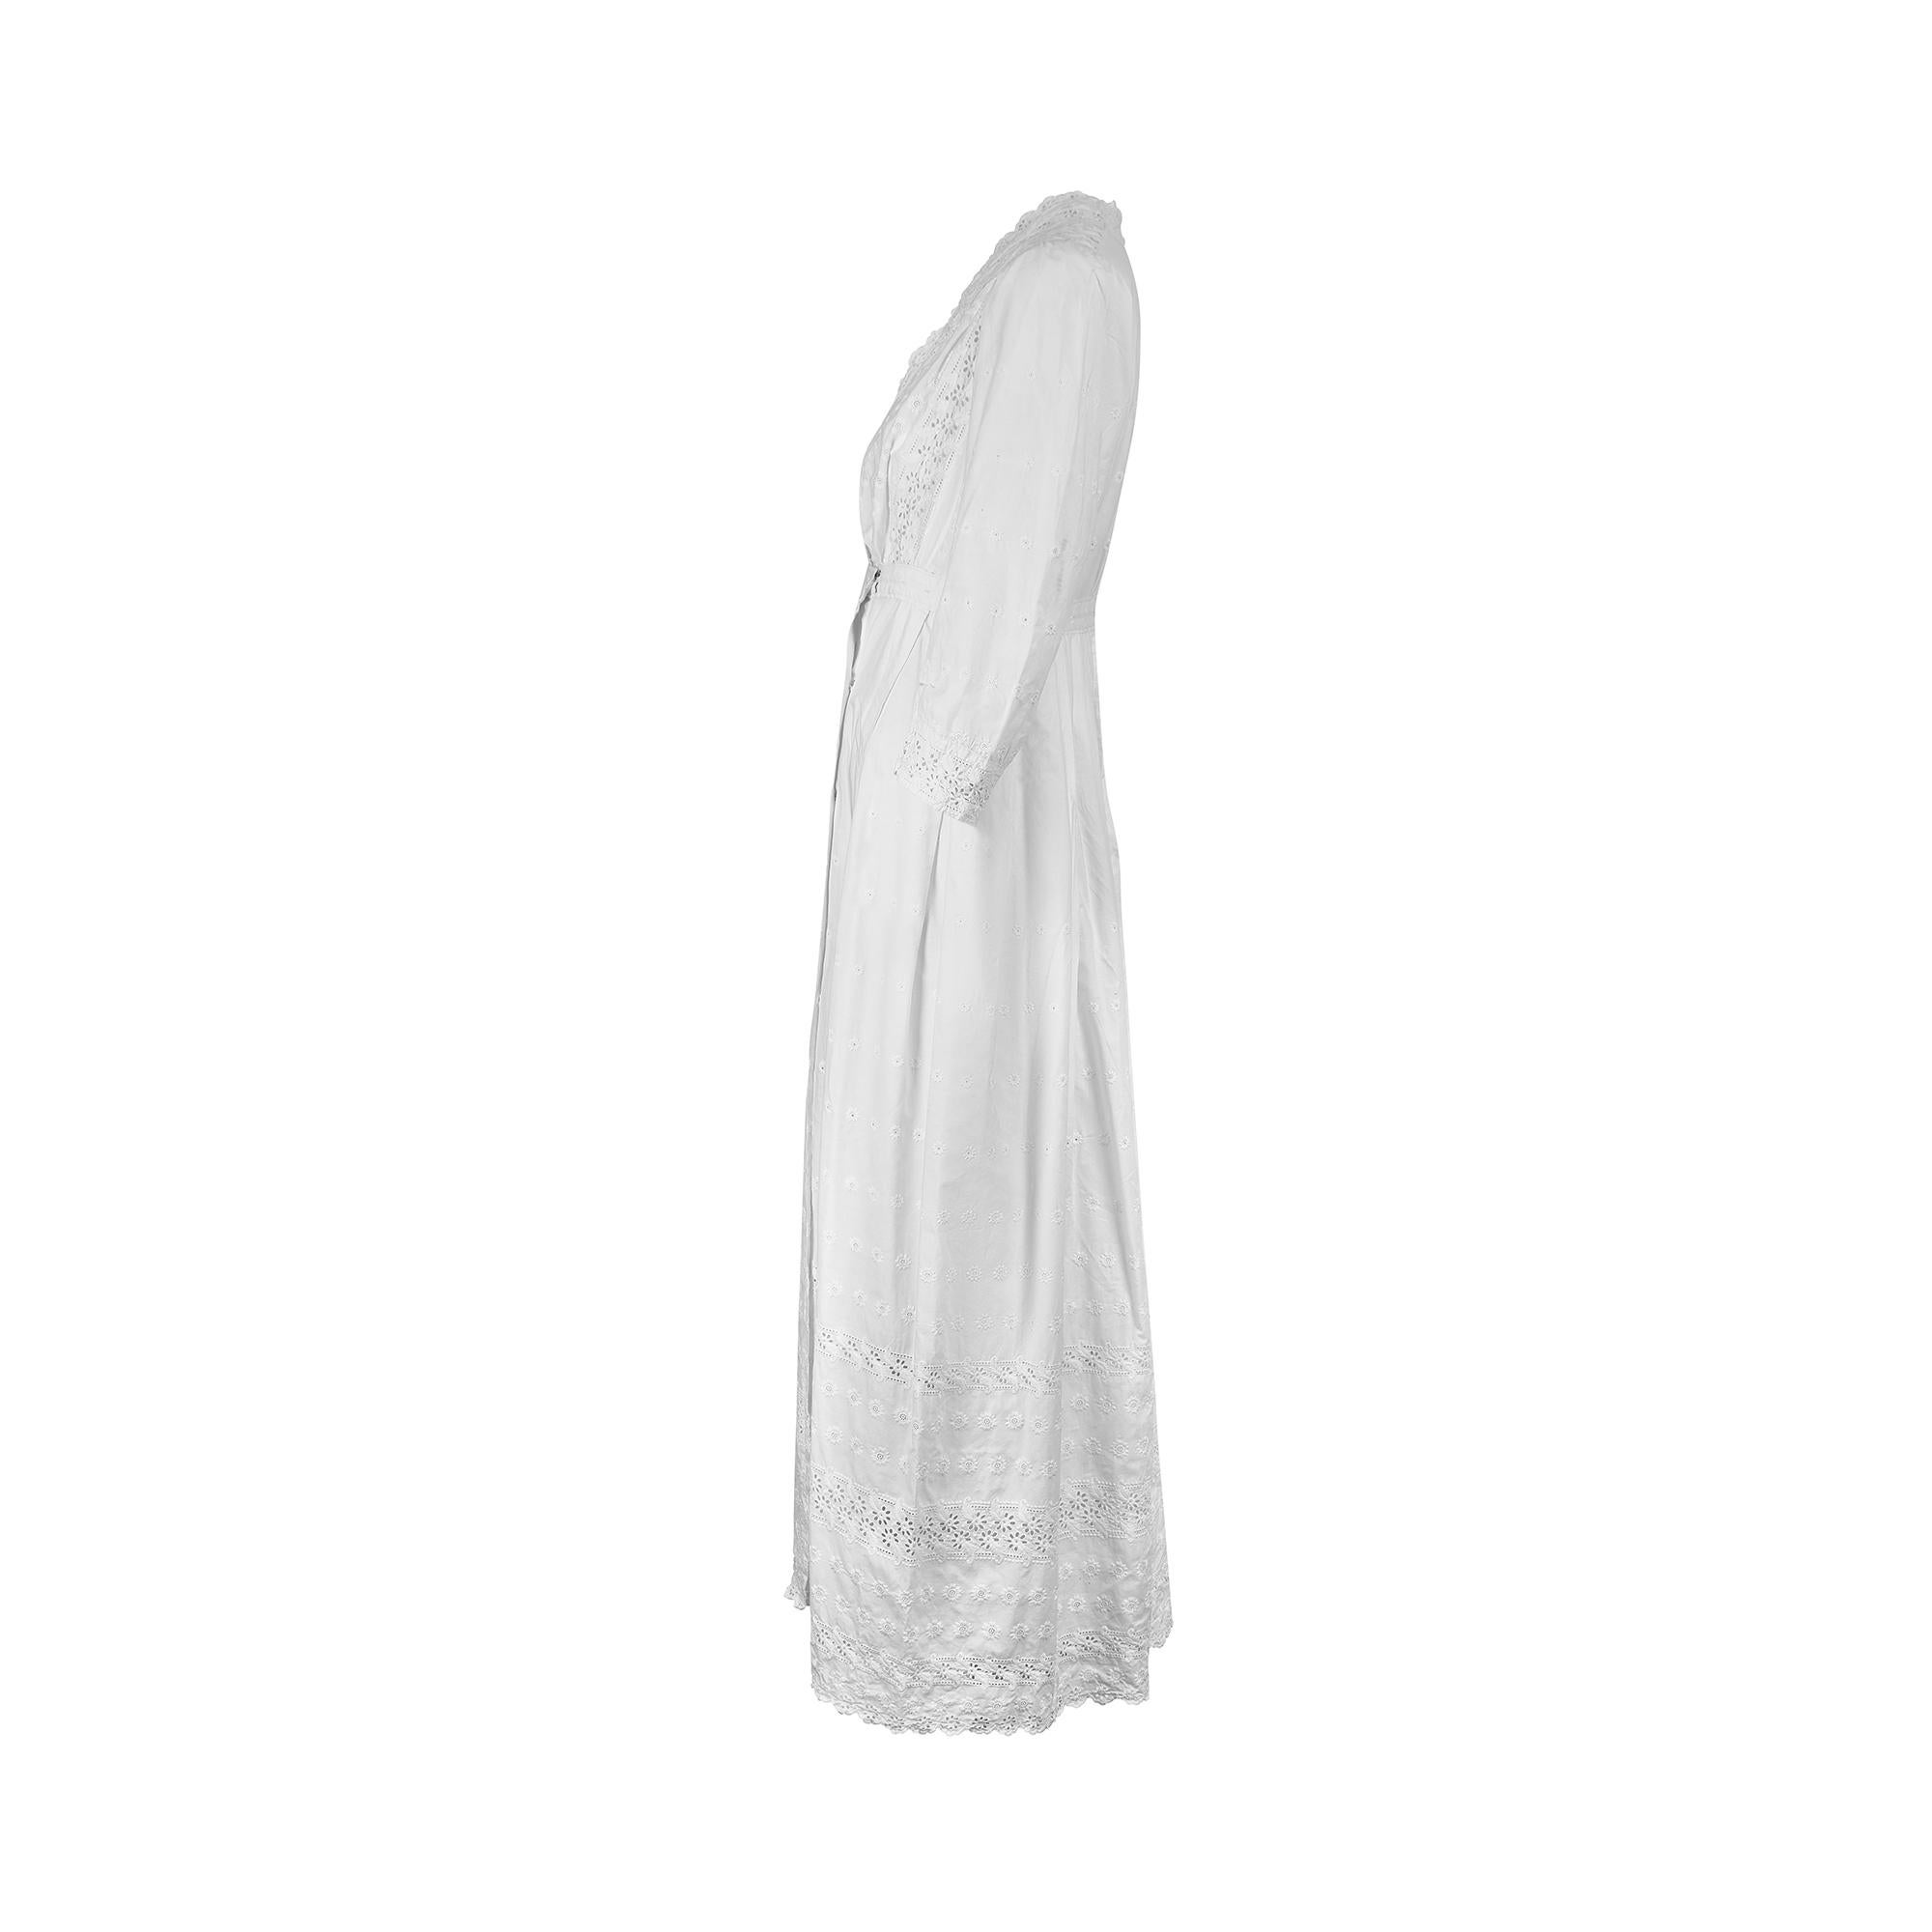 This antique dress was created in the 1910s and is in superb condition without fault. The cotton remains brilliant white and completely unmarked, detailed with hand cut eyelet work and tonal satin stitch embroidery all-over but more heavily across